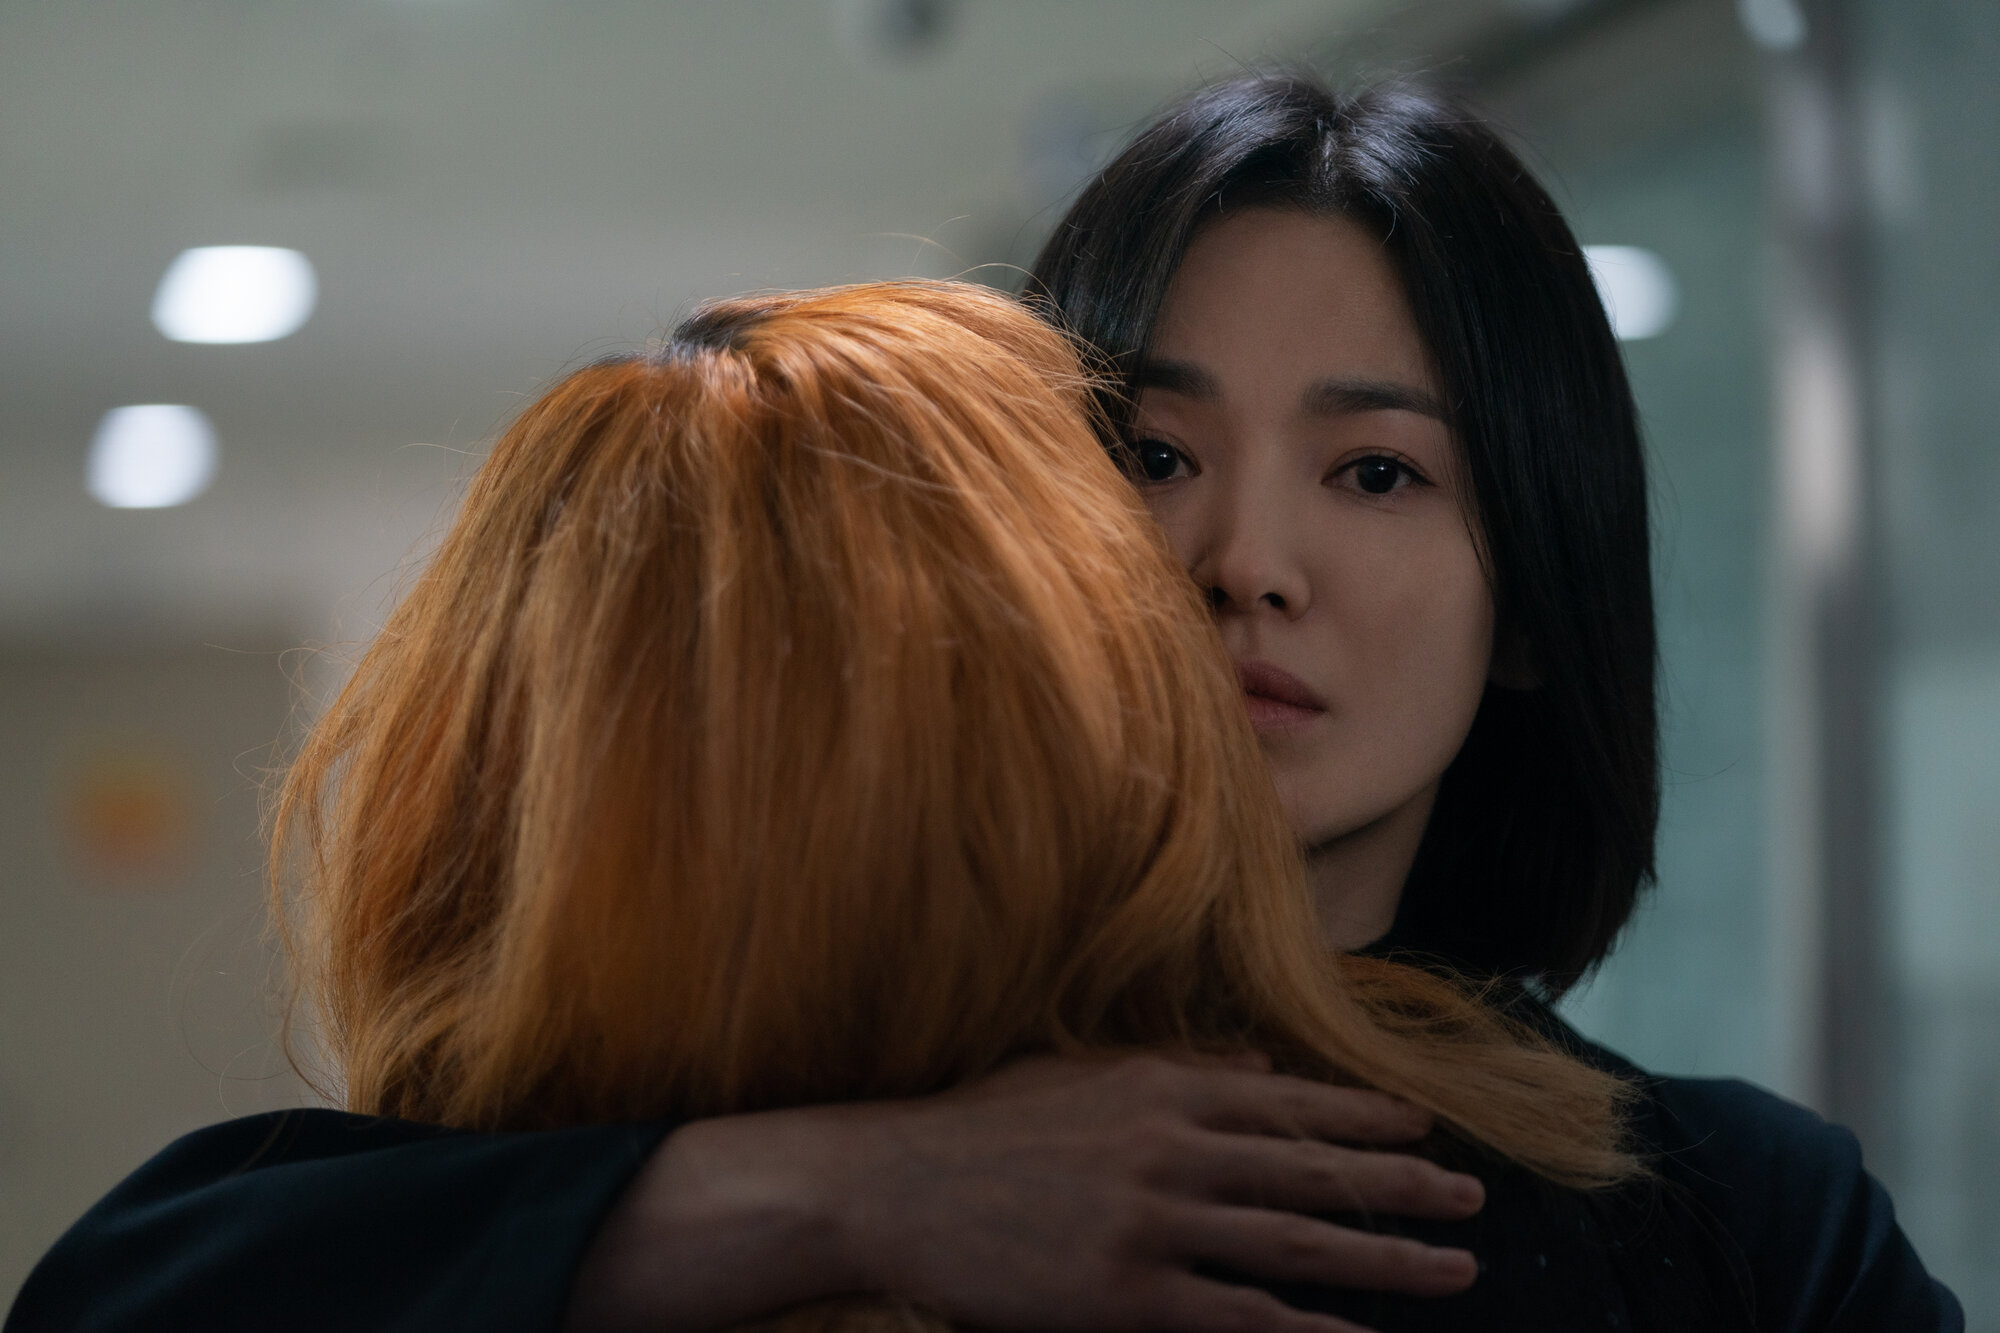 The Glory Part 2 Trailer Promises A Chilling End To Netflix S Revenge Drama Starring Song Hye